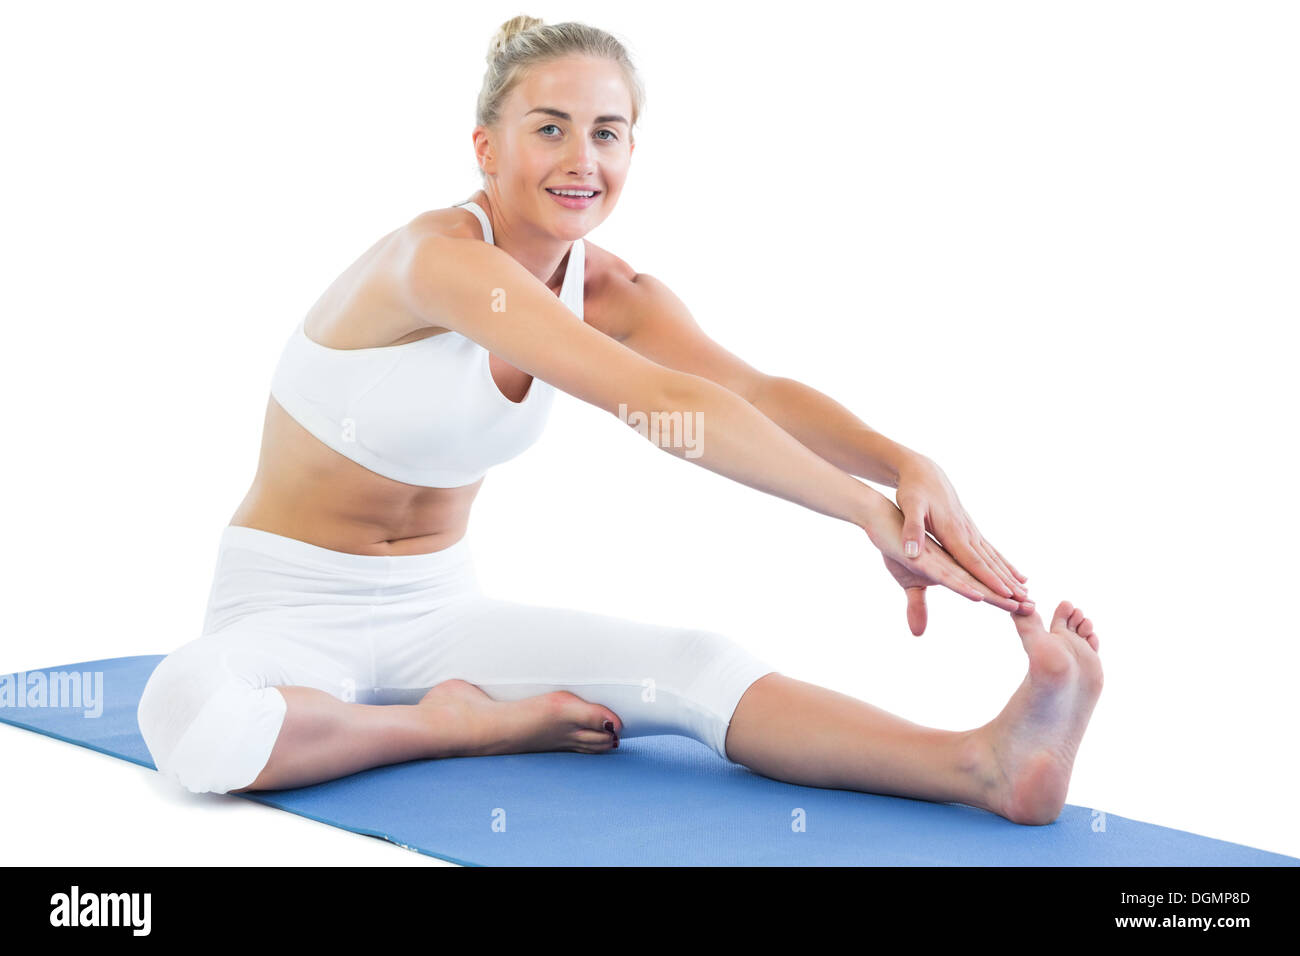 Toned smiling blonde sitting on exercise mat stretching right leg Stock Photo